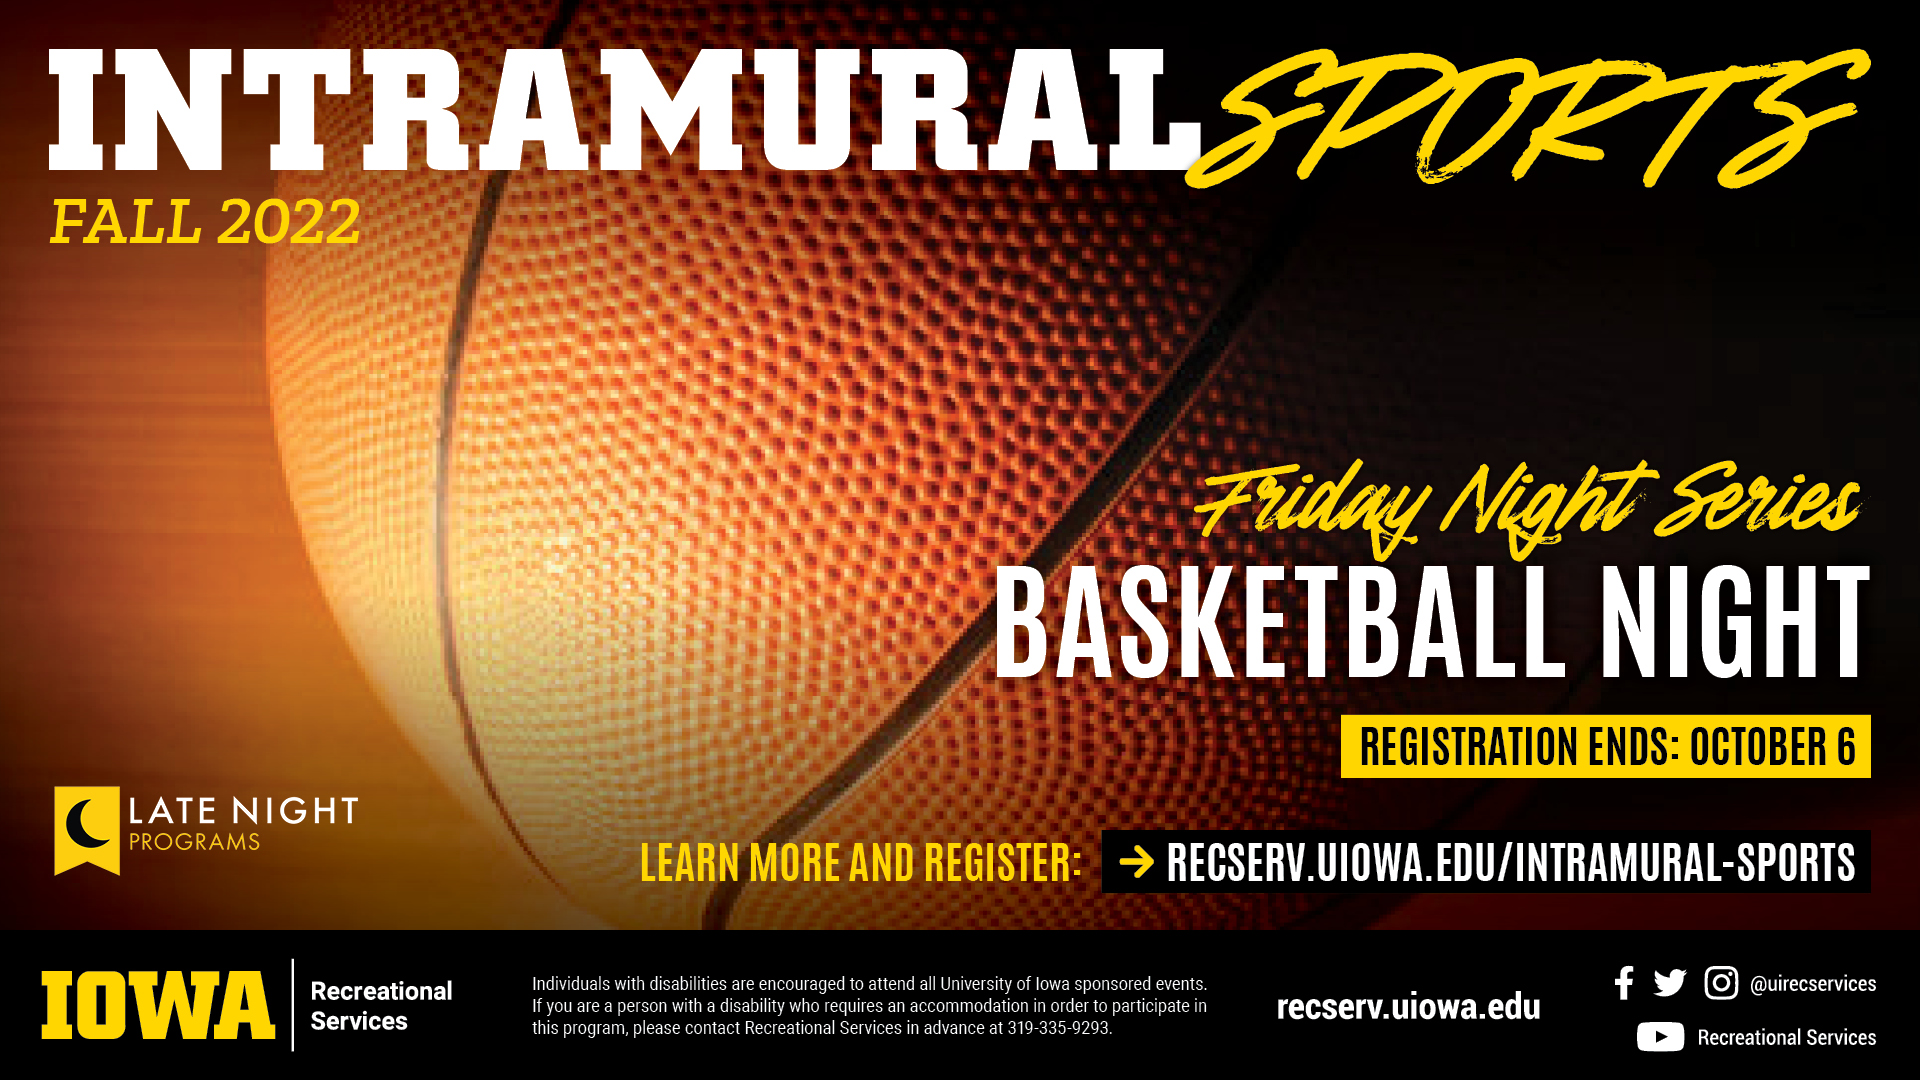 Intramural Sports Fall 2022: FNS Basketball Night. Learn more and register at reserv.uiowa.edu/intramural-sports